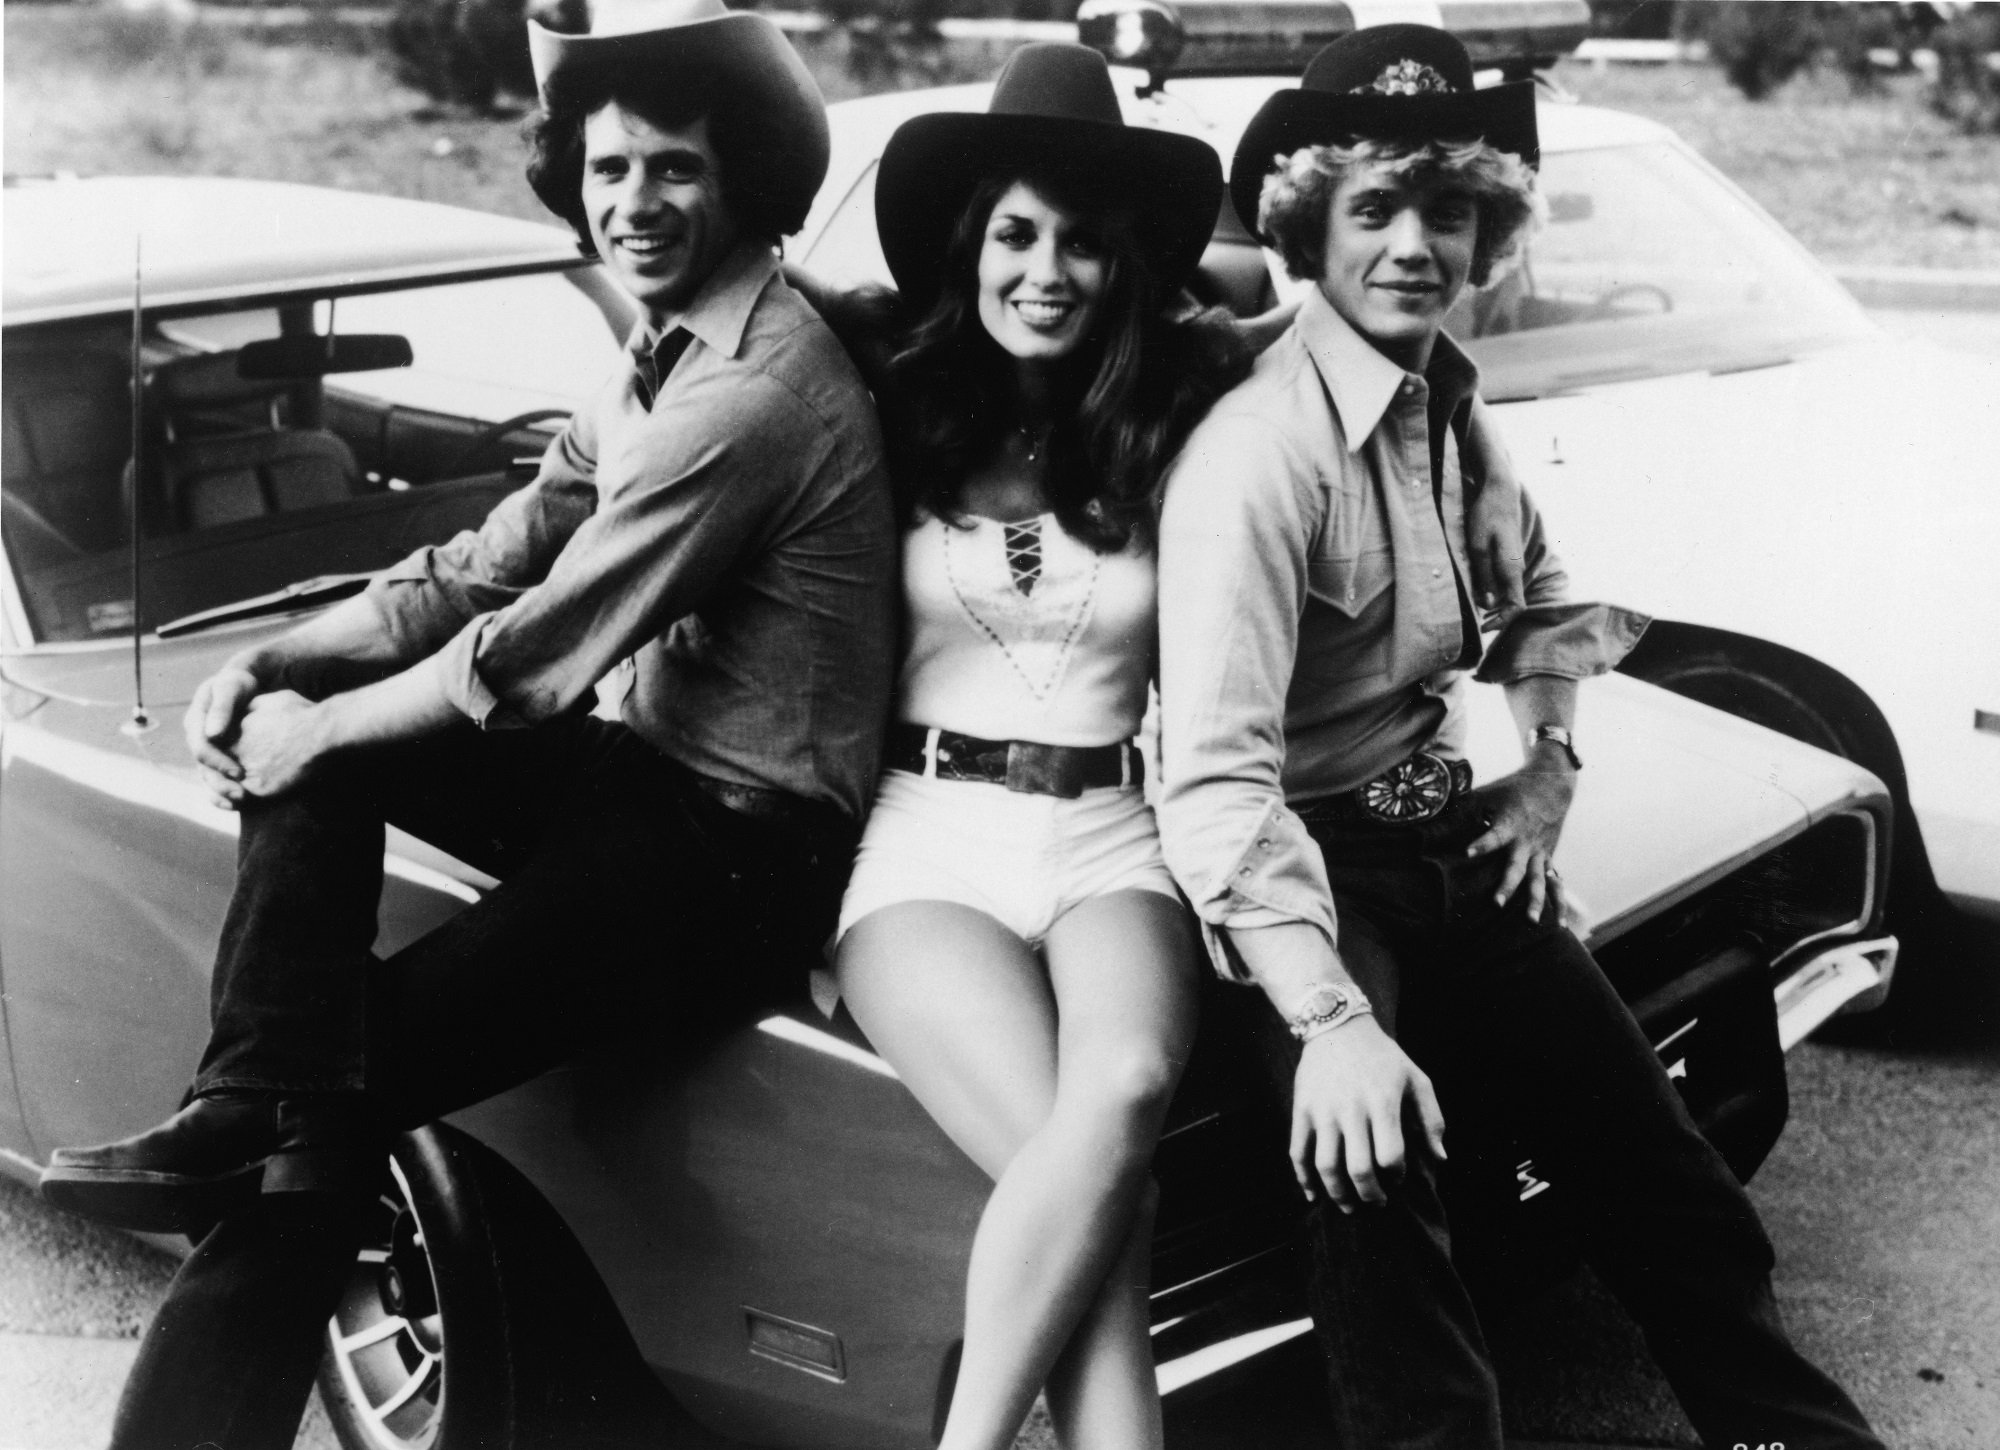 Tom Wopat, Catherine Bach, and John Schneider of 'The Dukes of Hazzard'